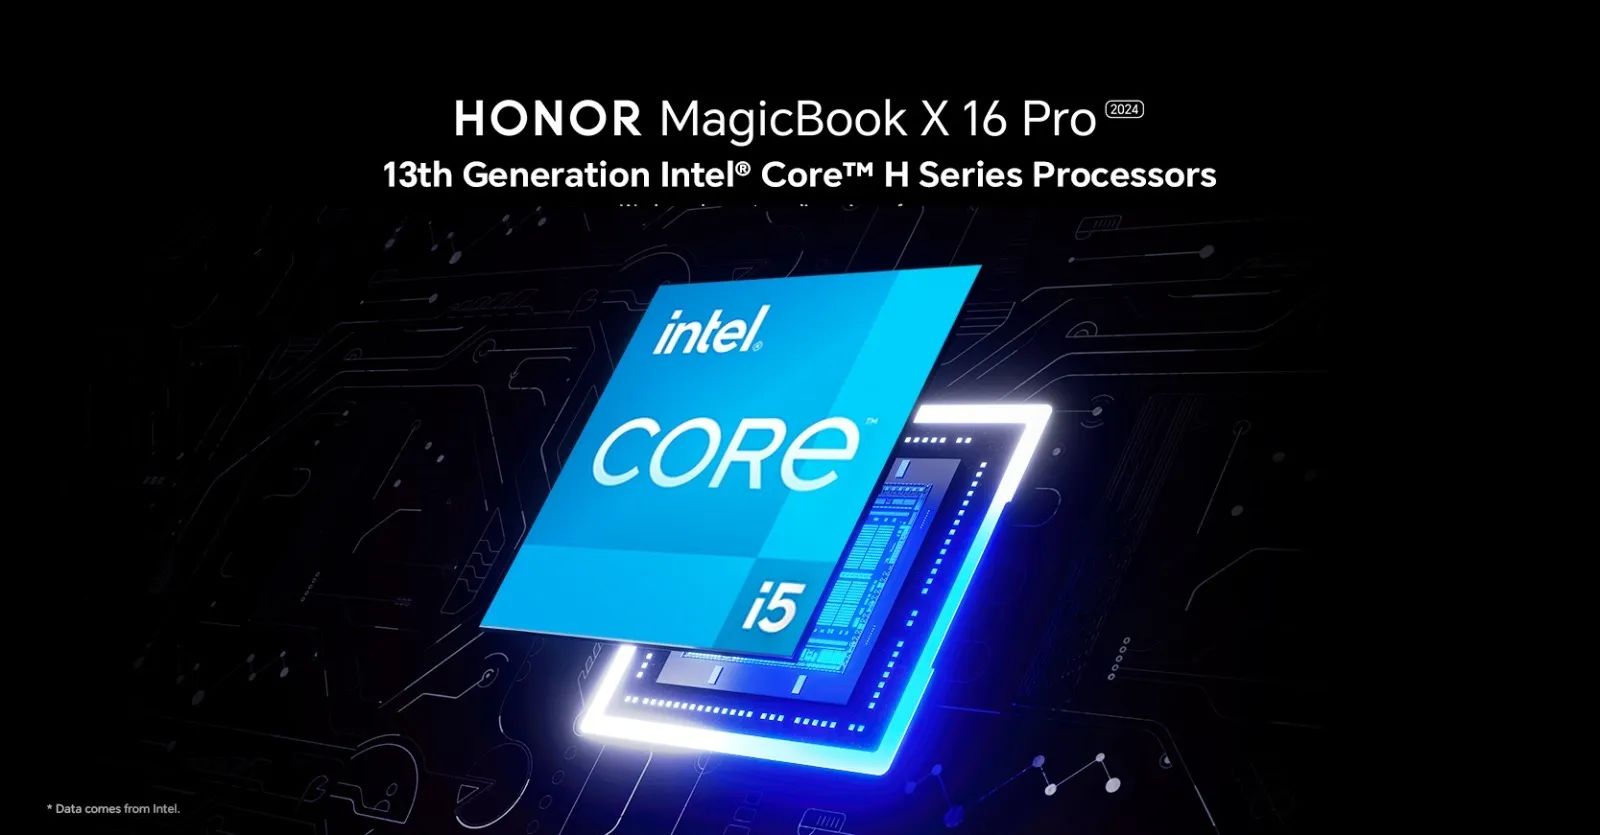 Both models feature 13th Gen Intel Core processors and Windows 11 Home OS